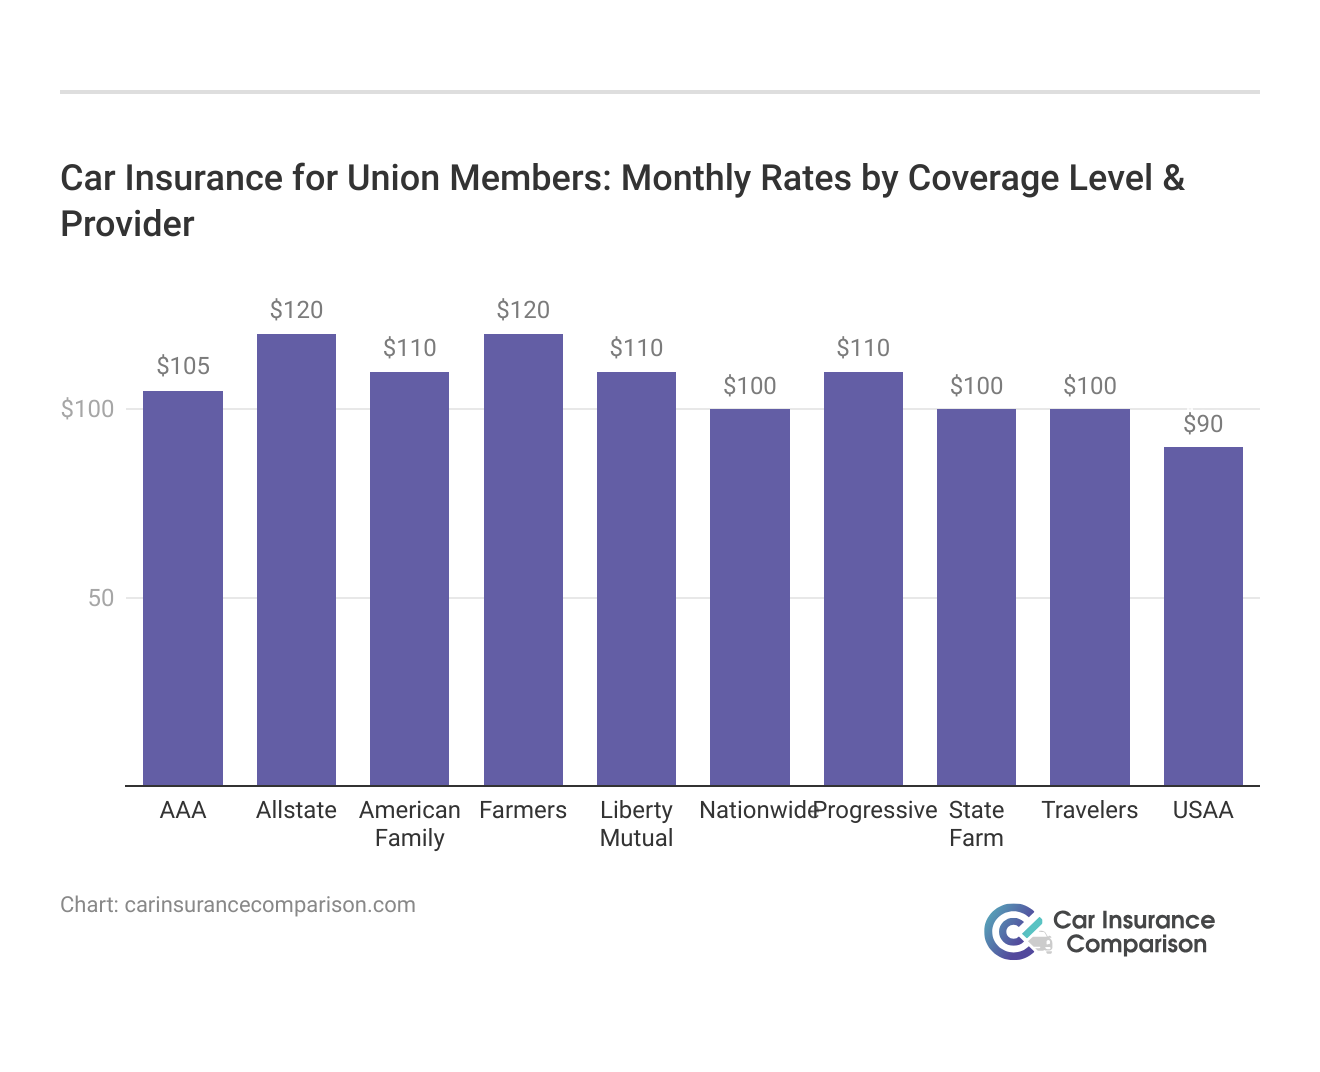 <h3>Car Insurance for Union Members: Monthly Rates by Coverage Level & Provider</h3>